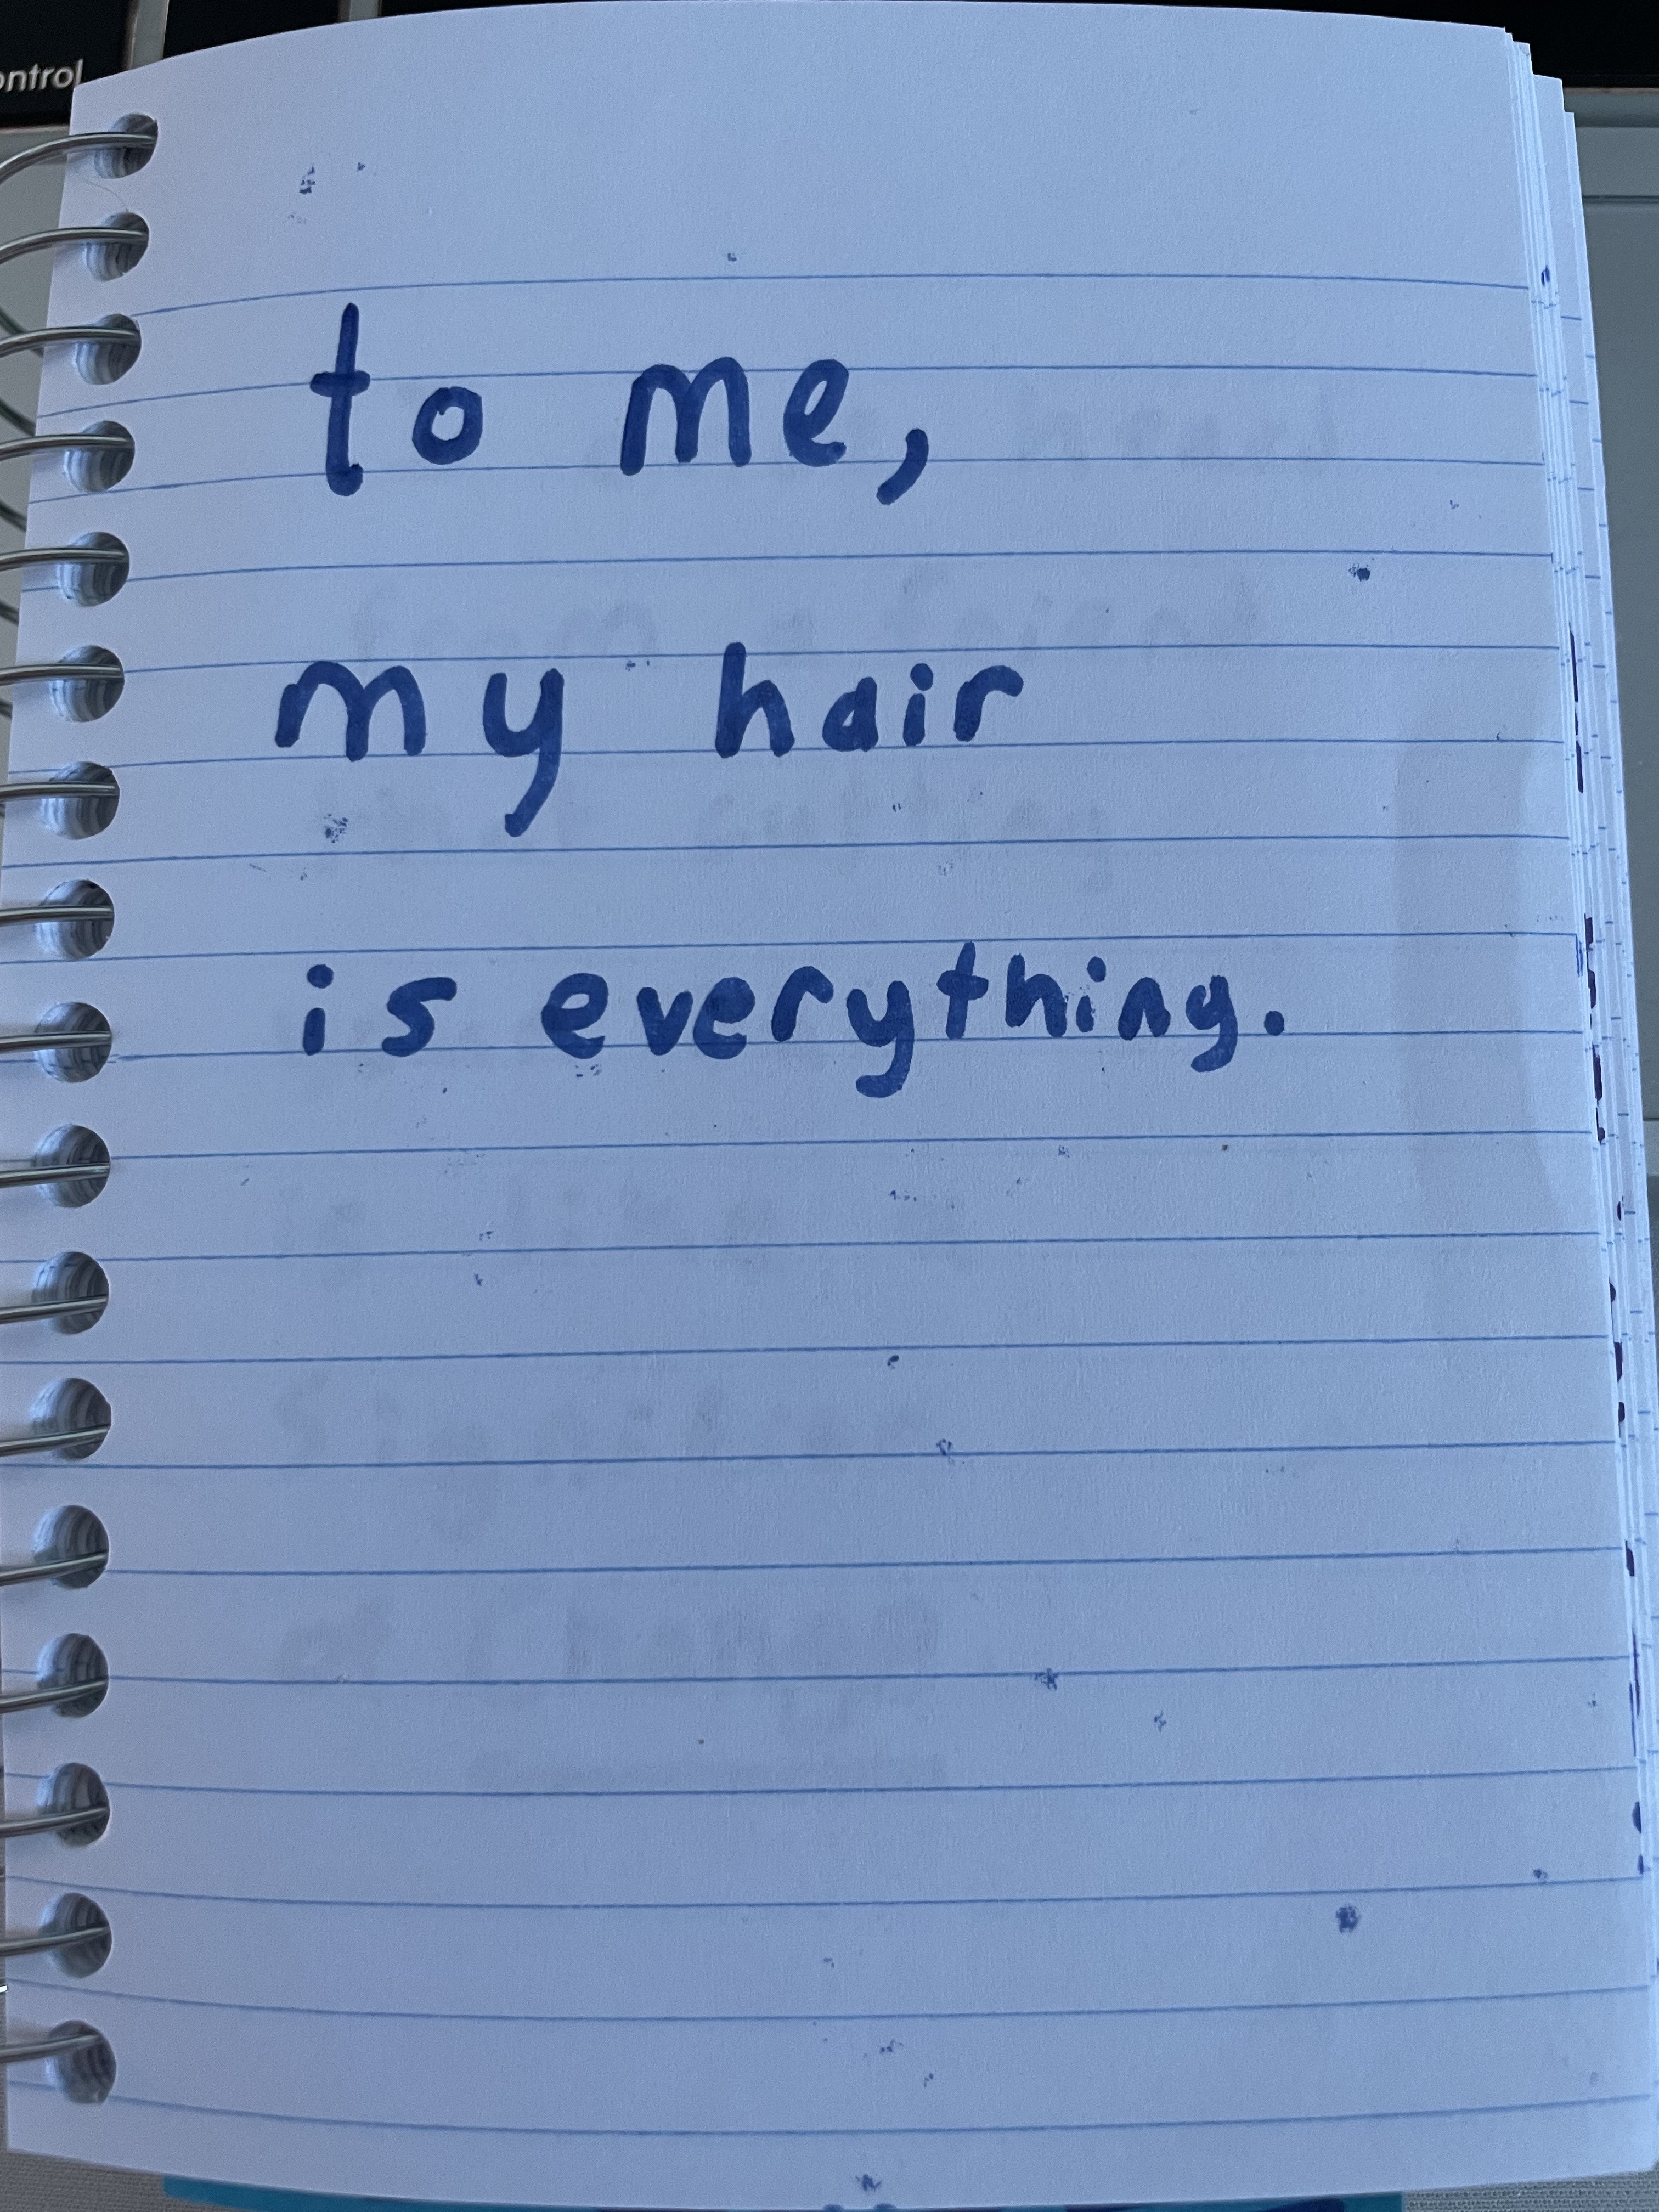 To me, my hair is everything.